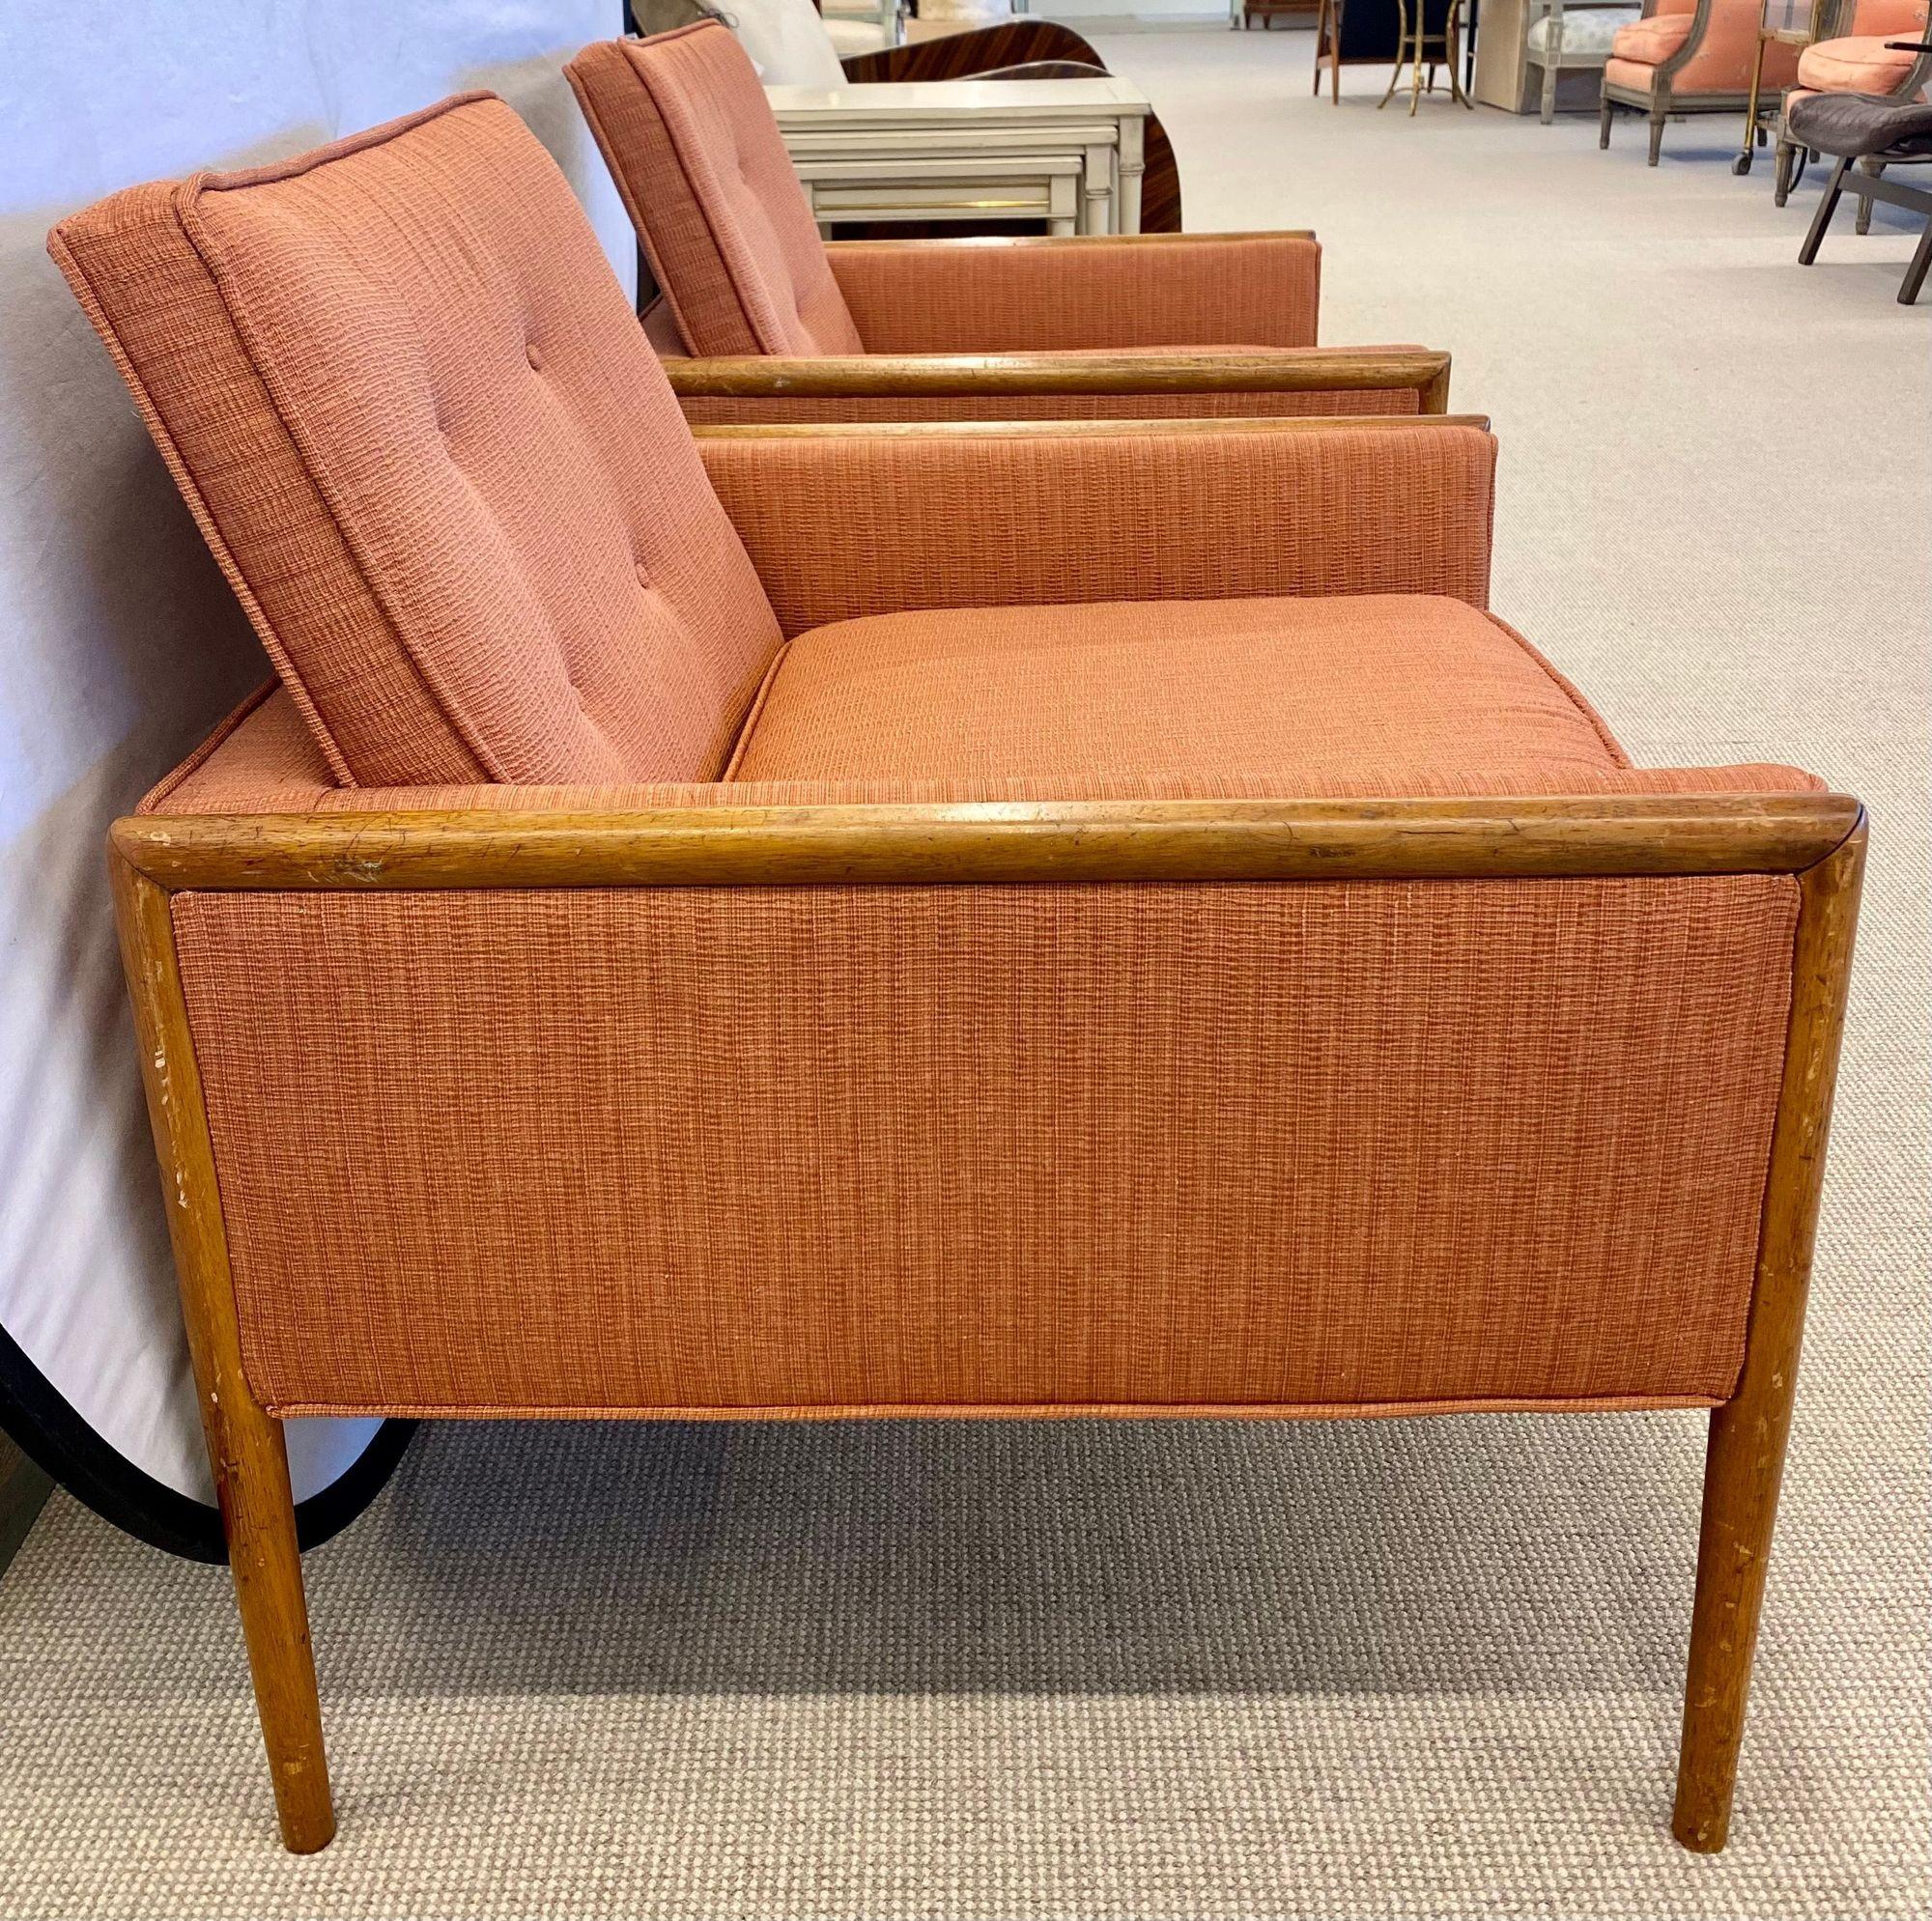 Pair of Mid-Century Modern Lounge Chairs, American, Walnut, 1960s For Sale 6